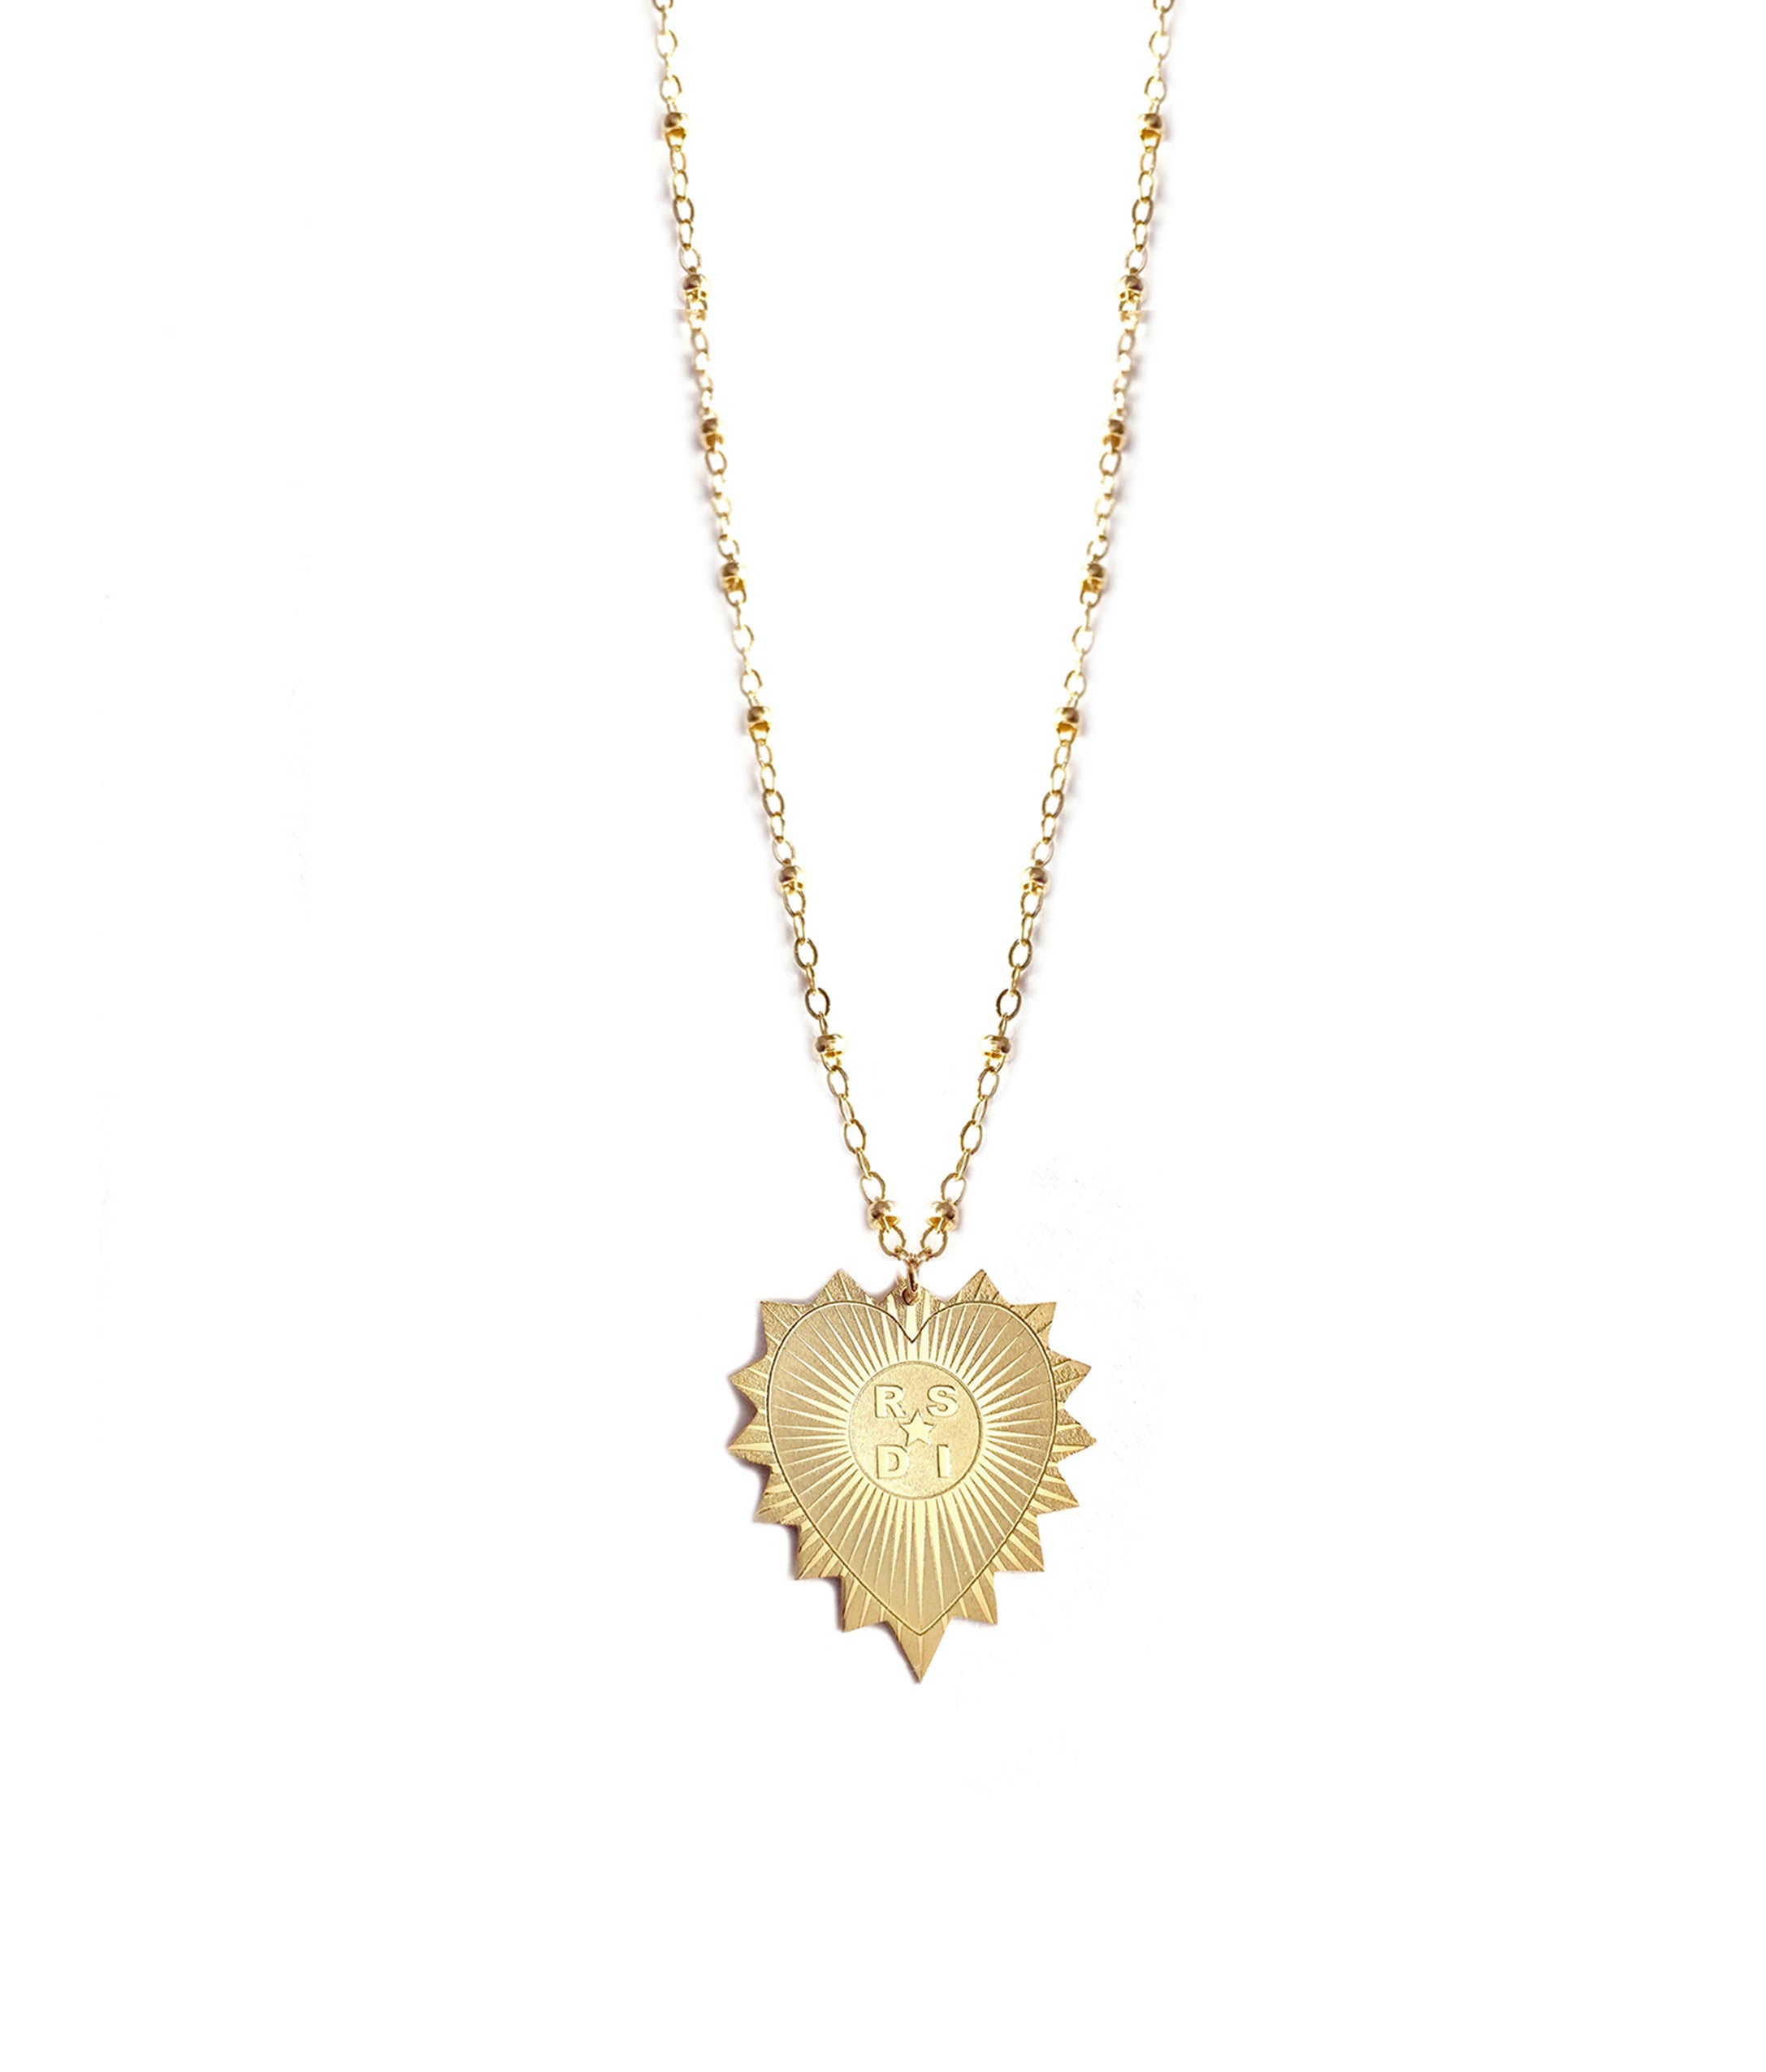 Heart Medallion Initials Necklace